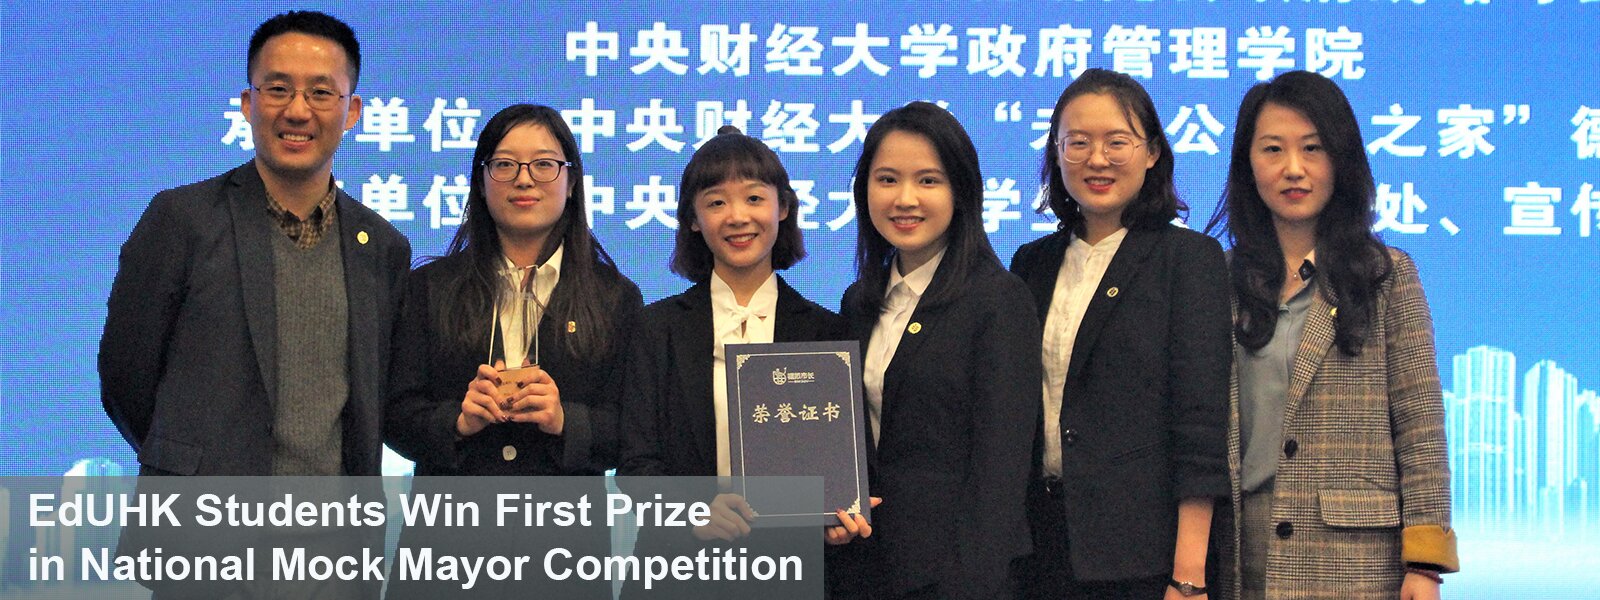 EdUHK Students Win First Prize in National Mock Mayor Competition